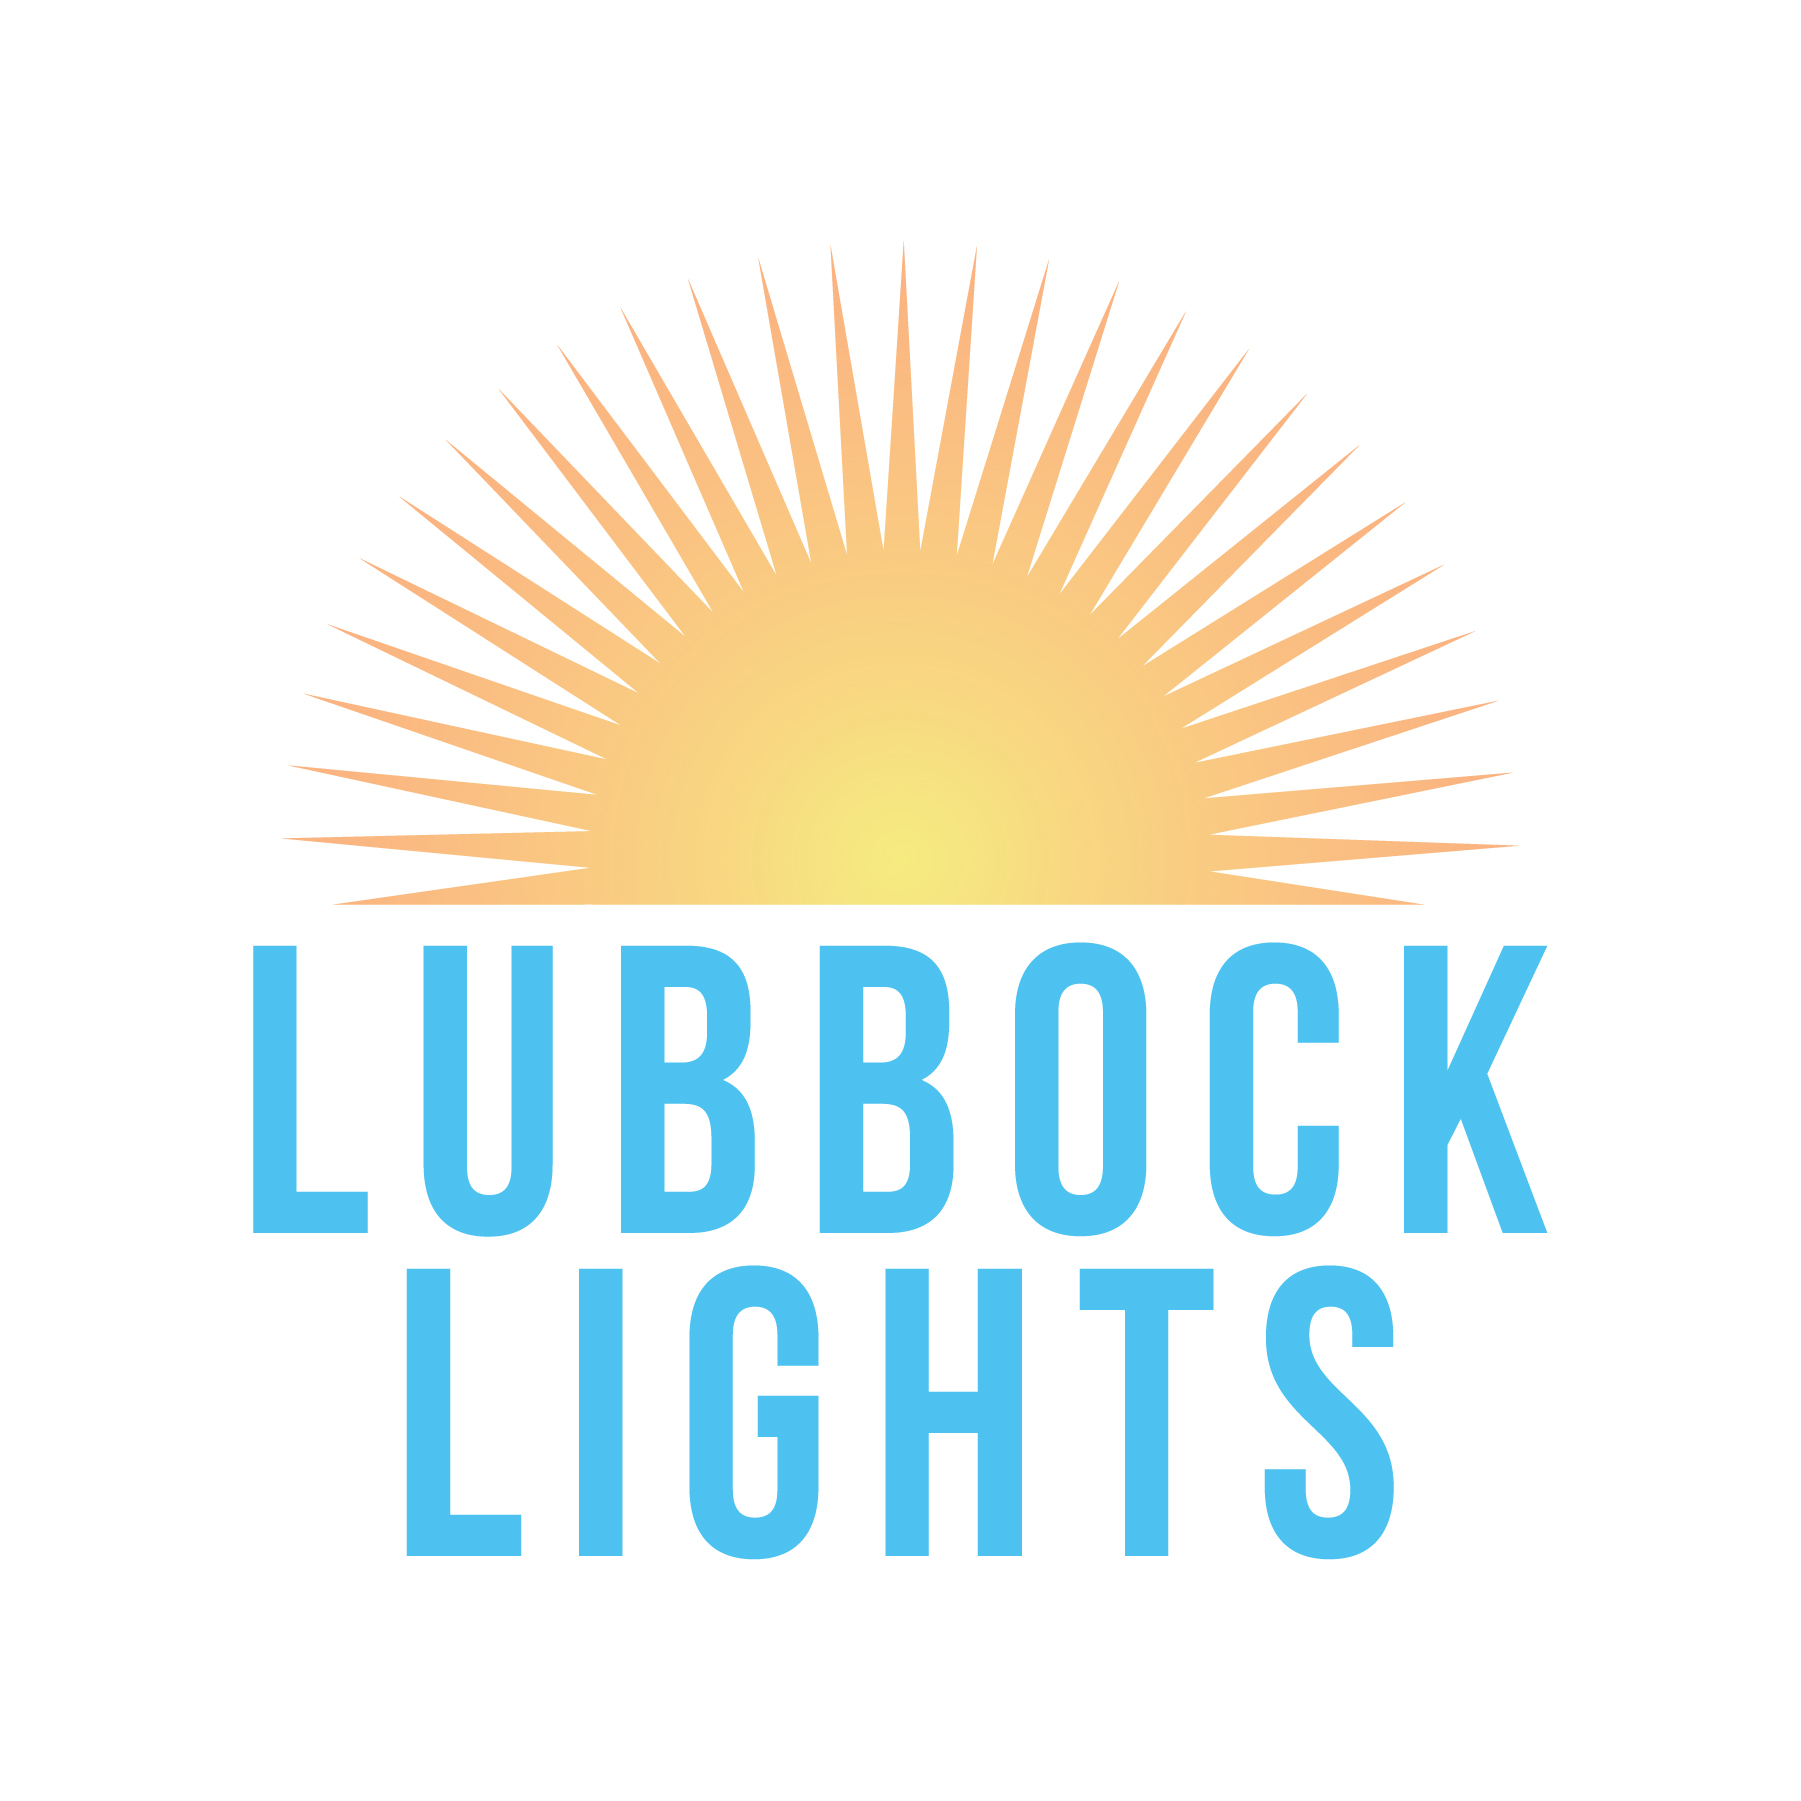 Lubbock Lights is back … with a different mission